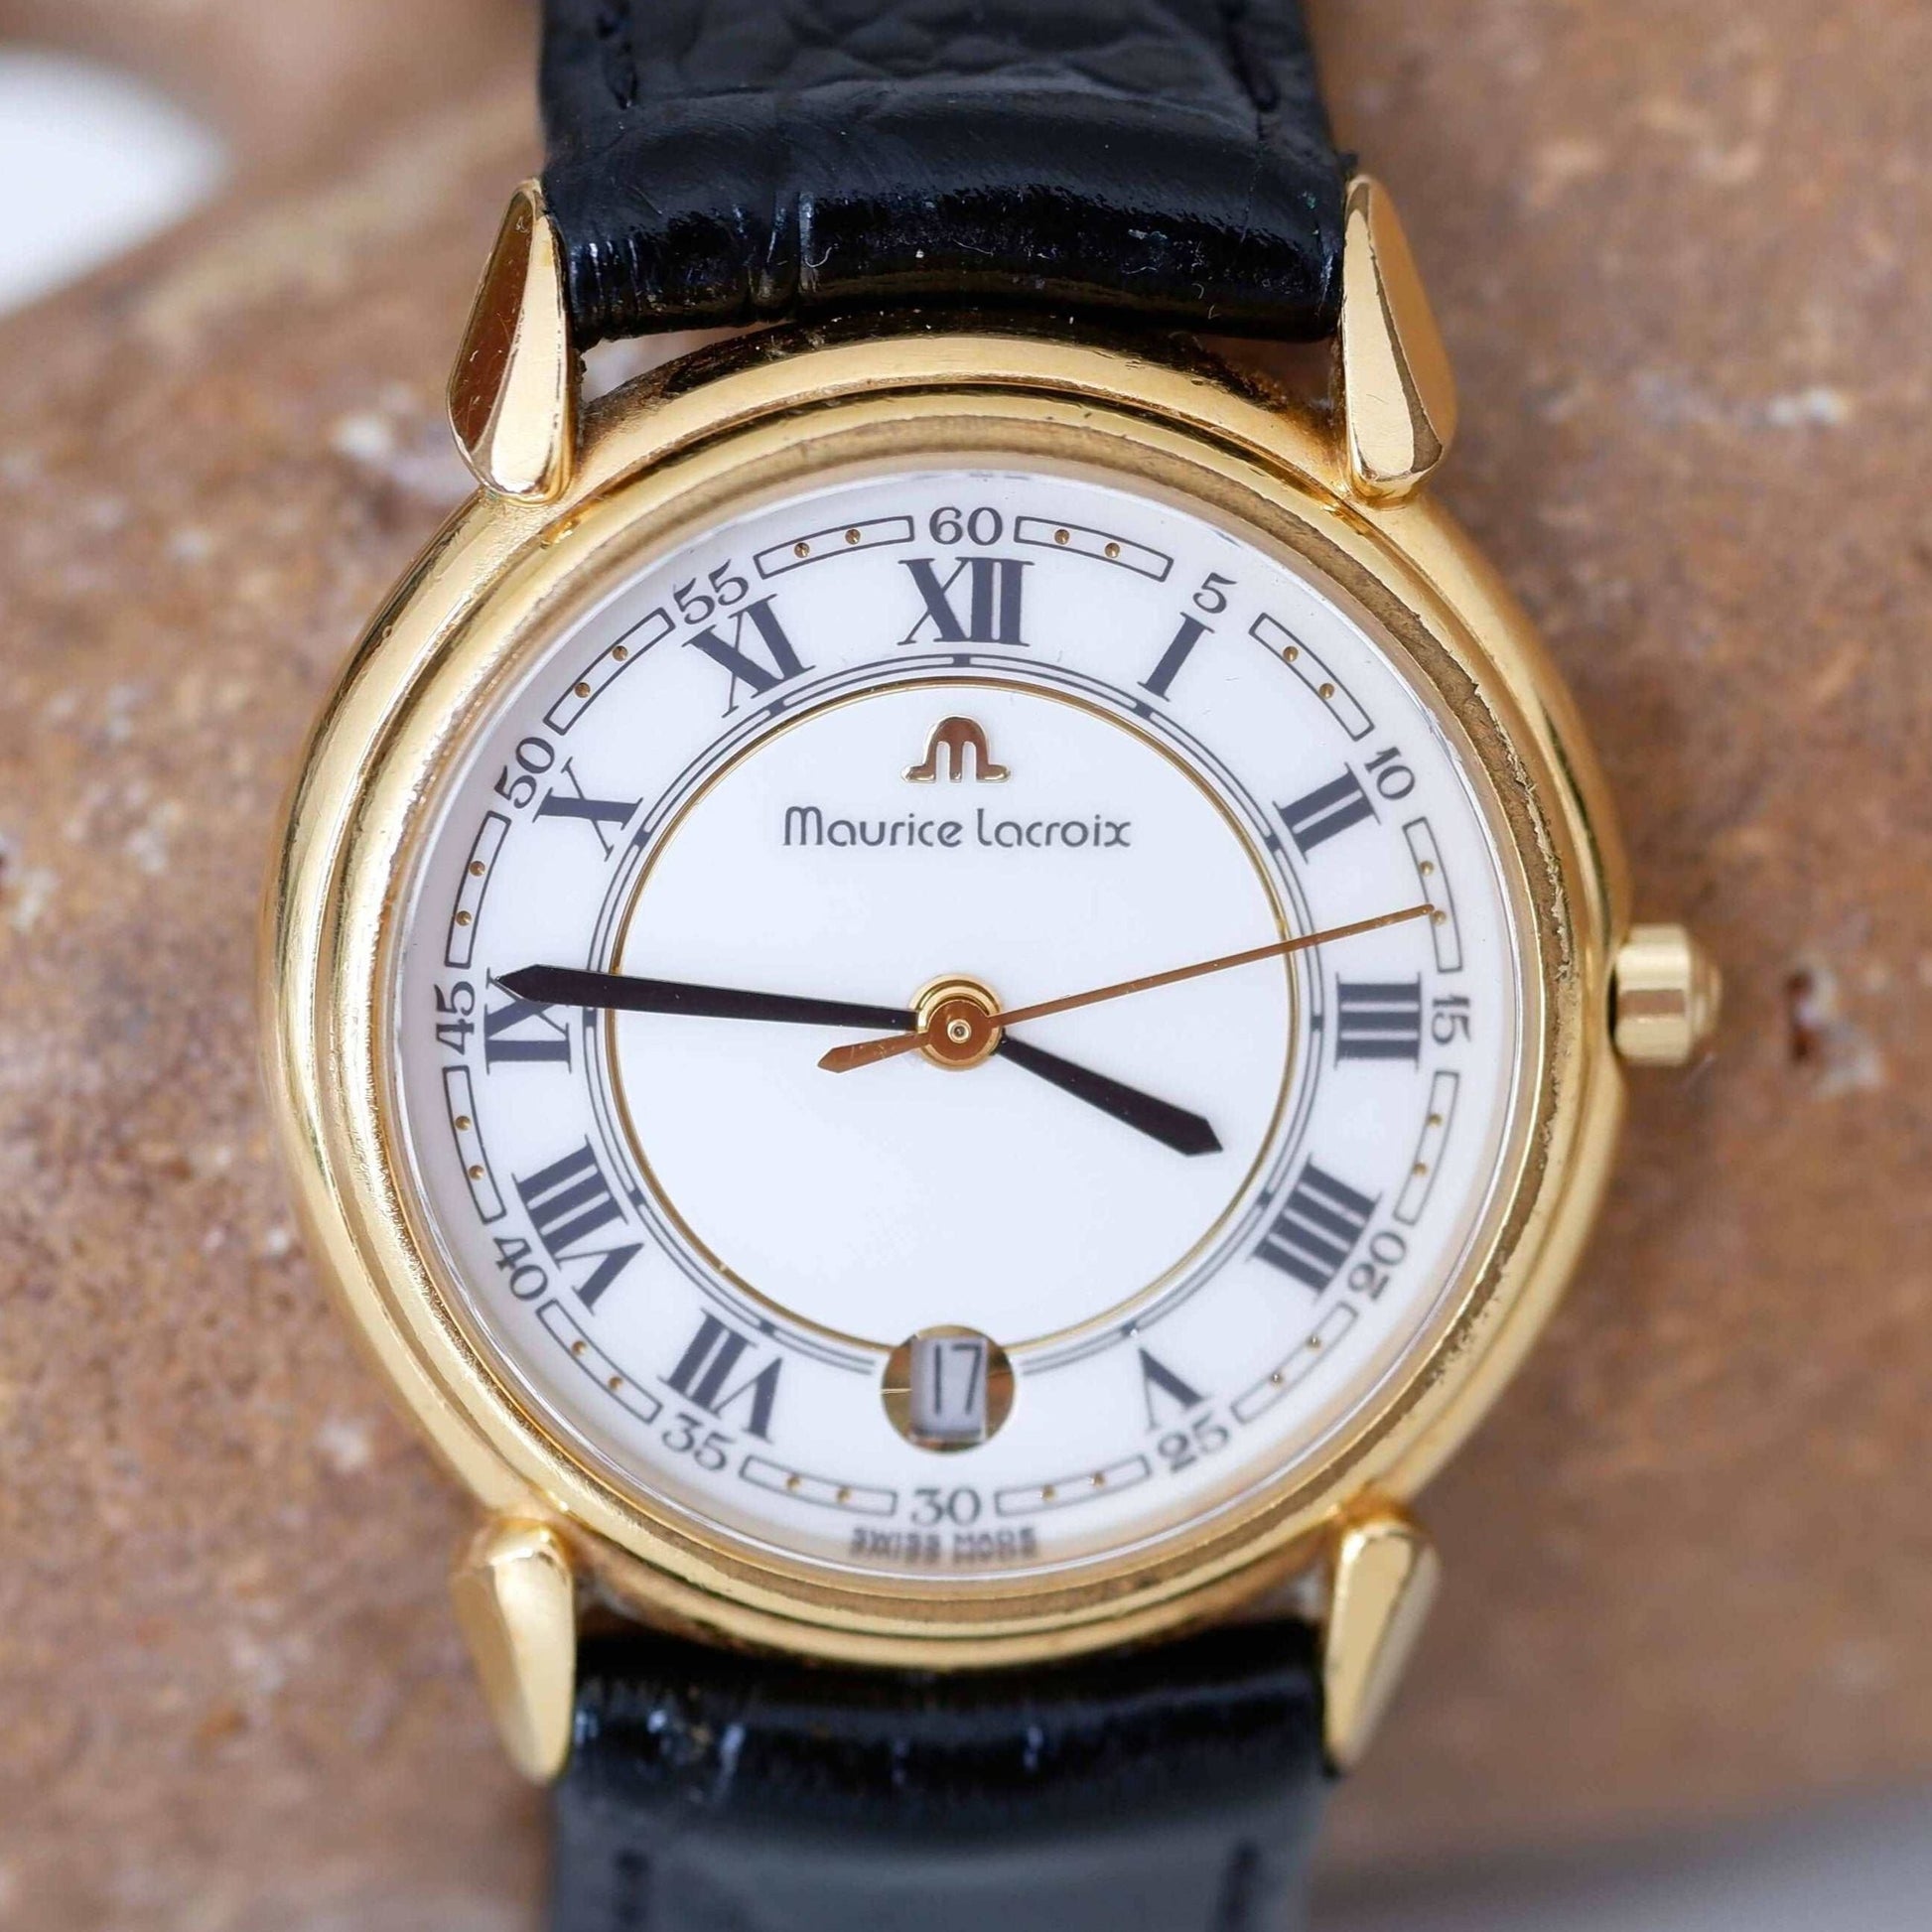 Maurice Lacroix Vintage Ladies Watch: 90s Golden with Classic Roman Numerals | First Front Side